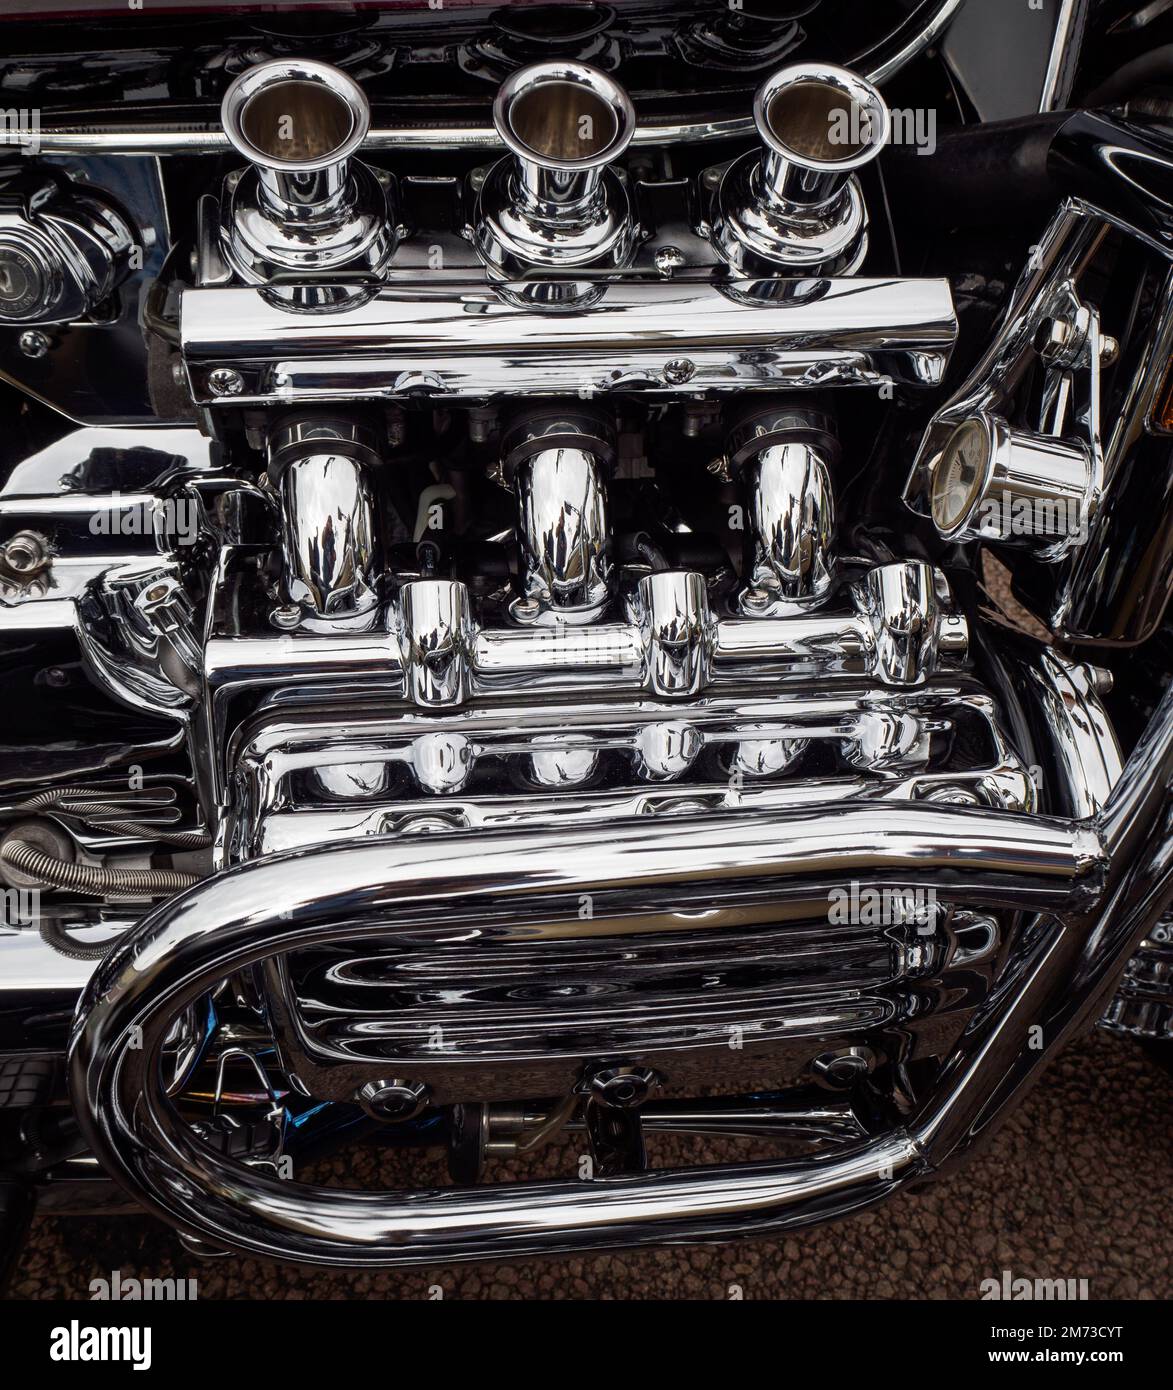 A massive motorcycle engine, polished to perfection Stock Photo